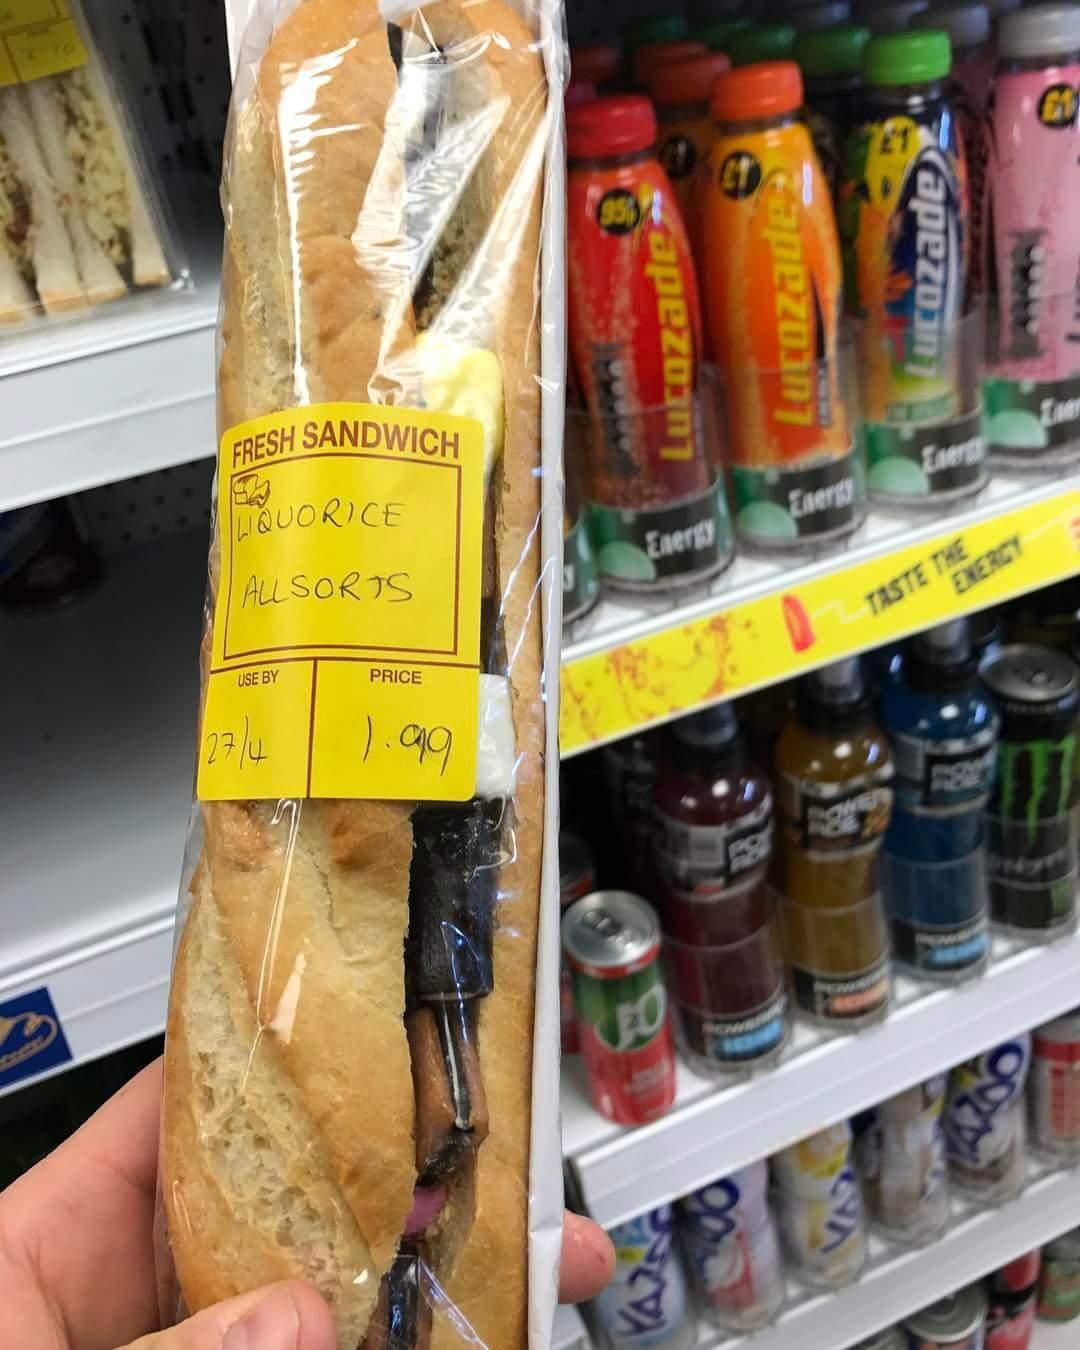 My friend went into a Welsh convenience store and found this..